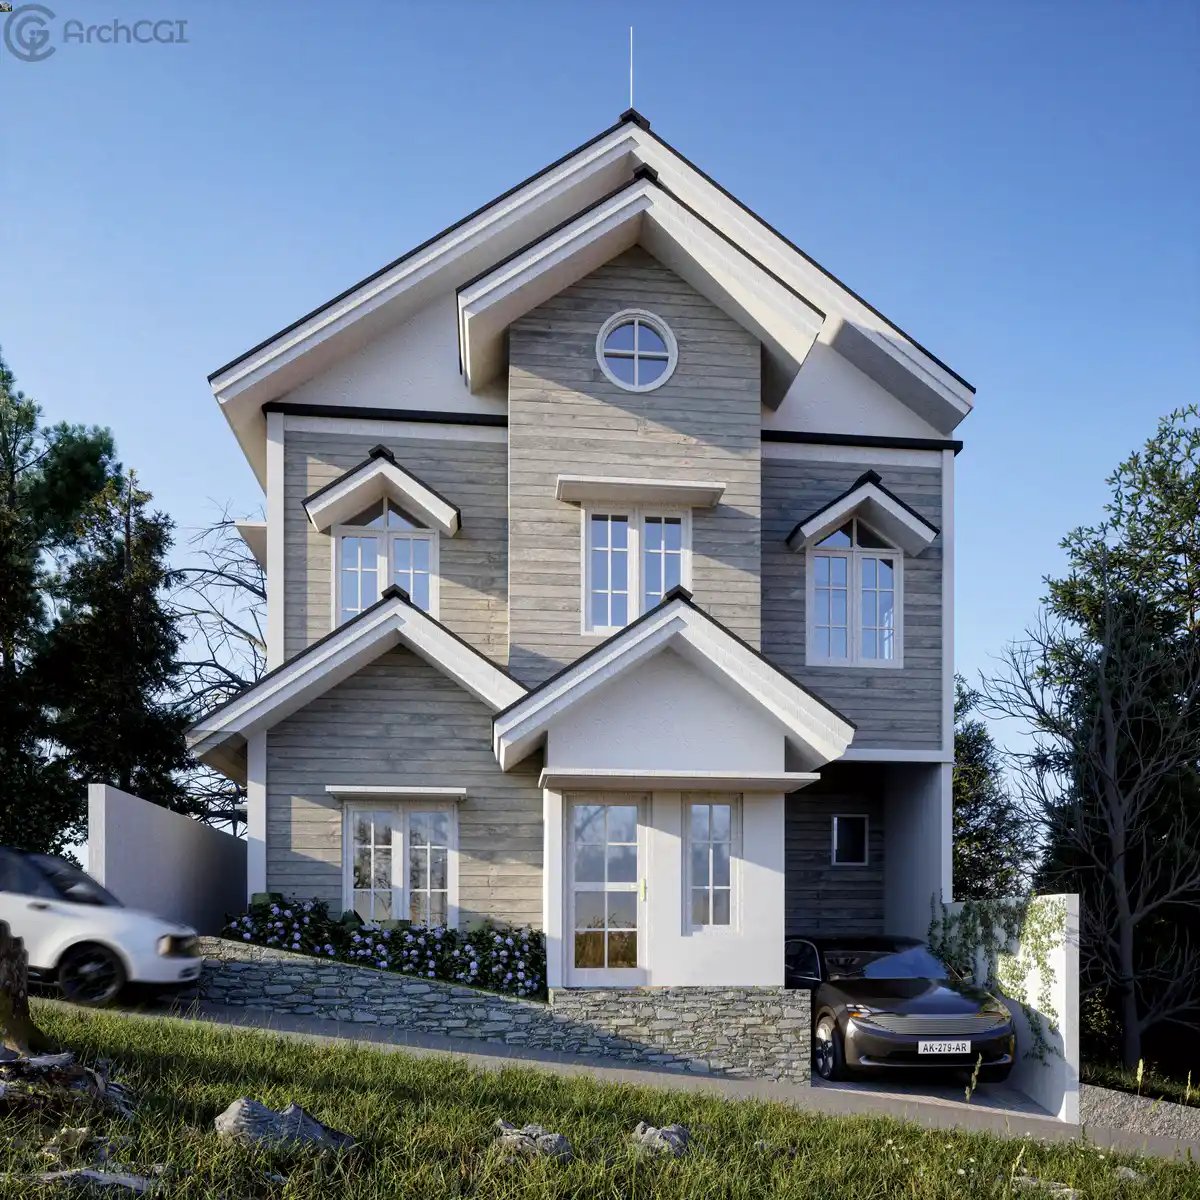 3D Exterior of Cottage Style House | Old house | Architectural Render | ArchCGI